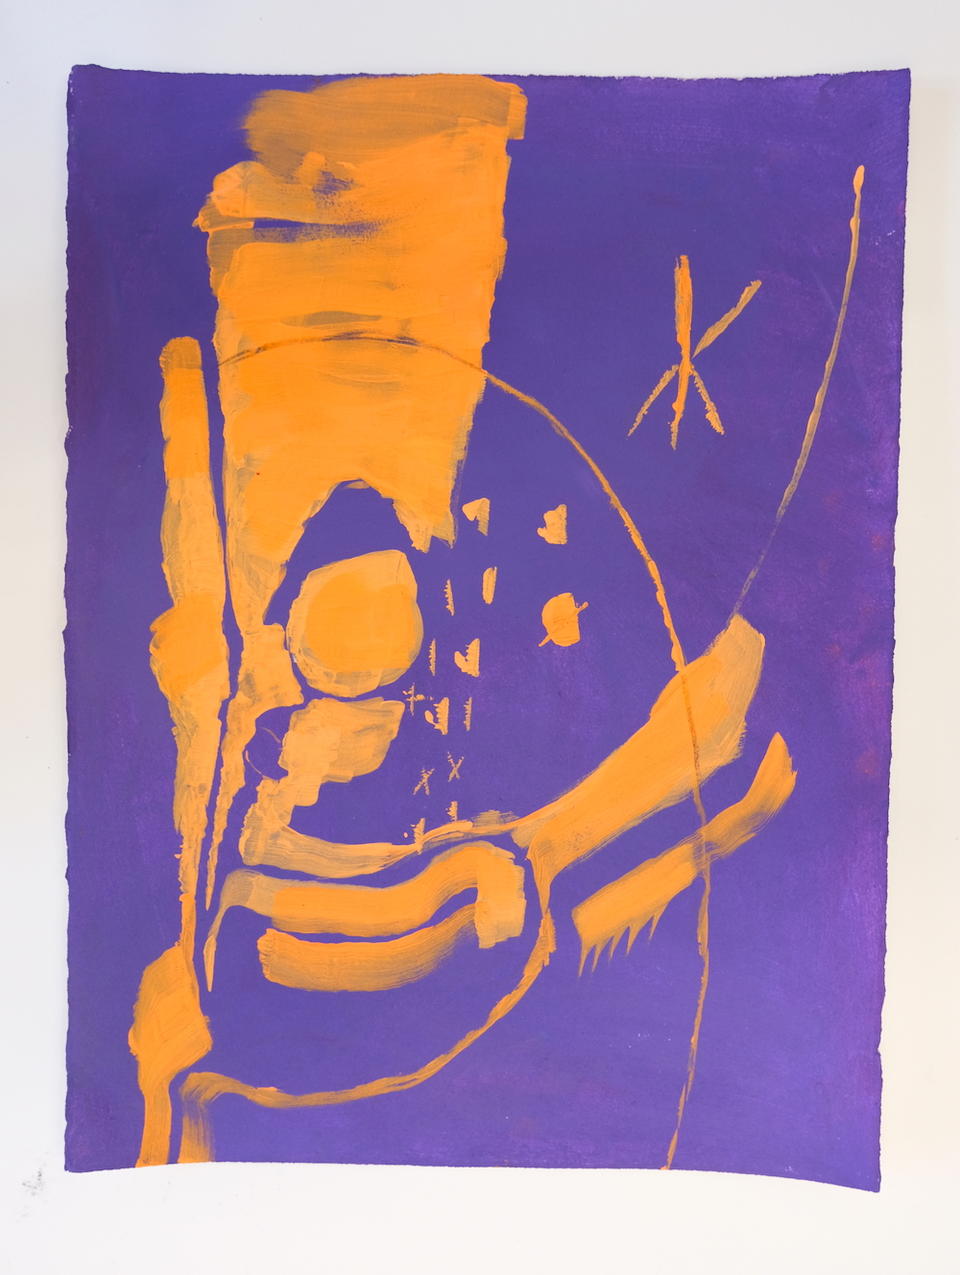 Photo of an orange and purple abstract drawing